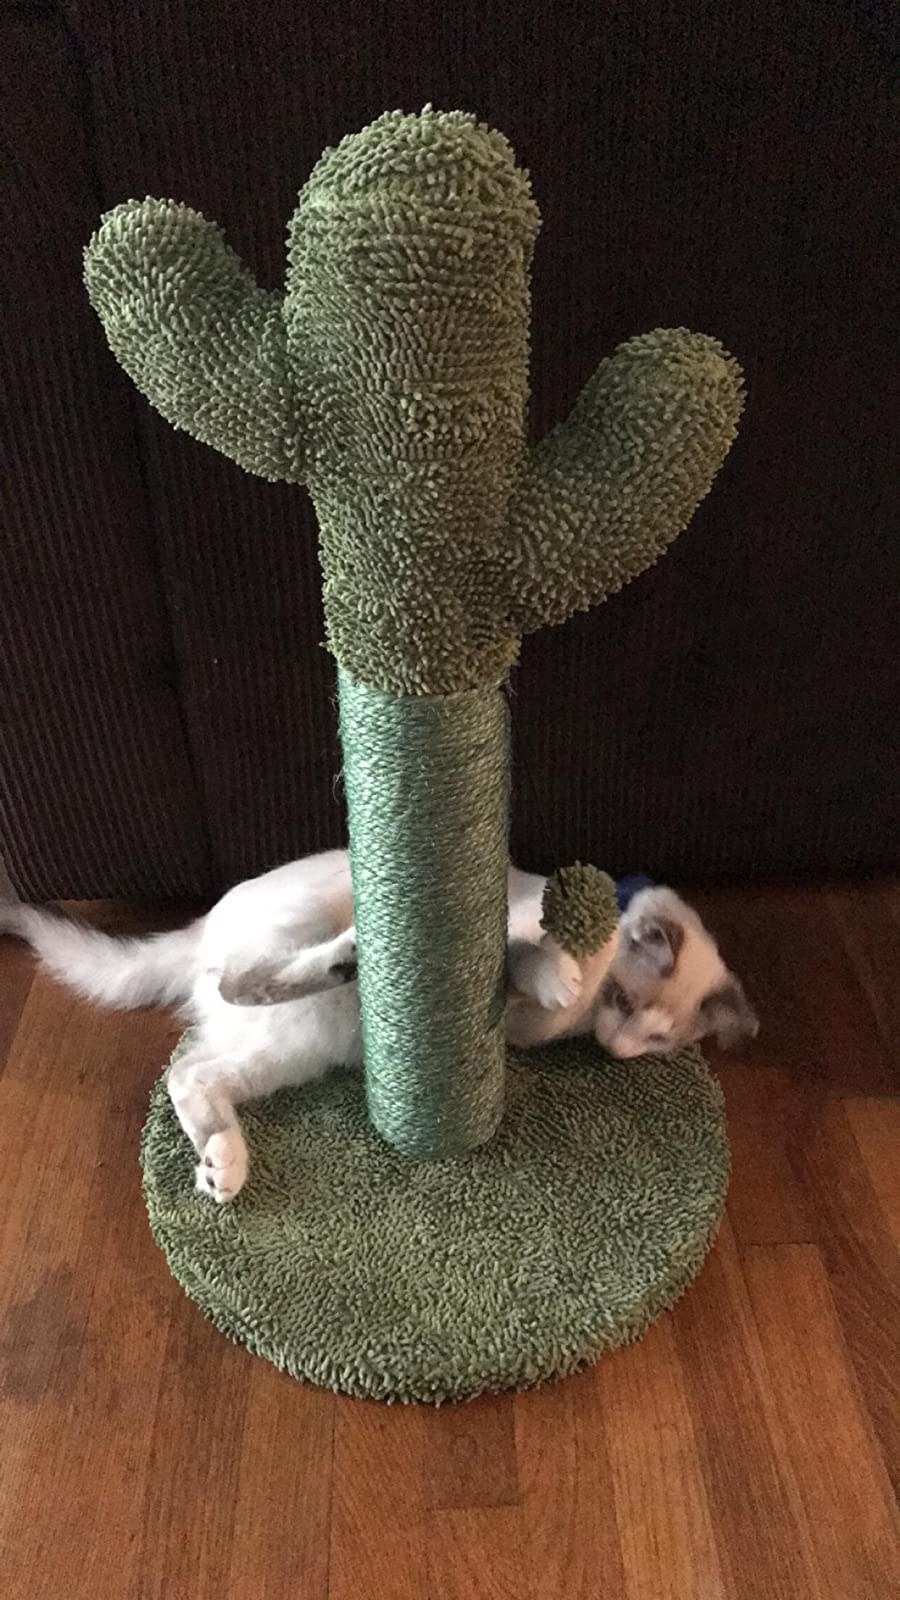 A cat scratches the freestanding cactus scratching post